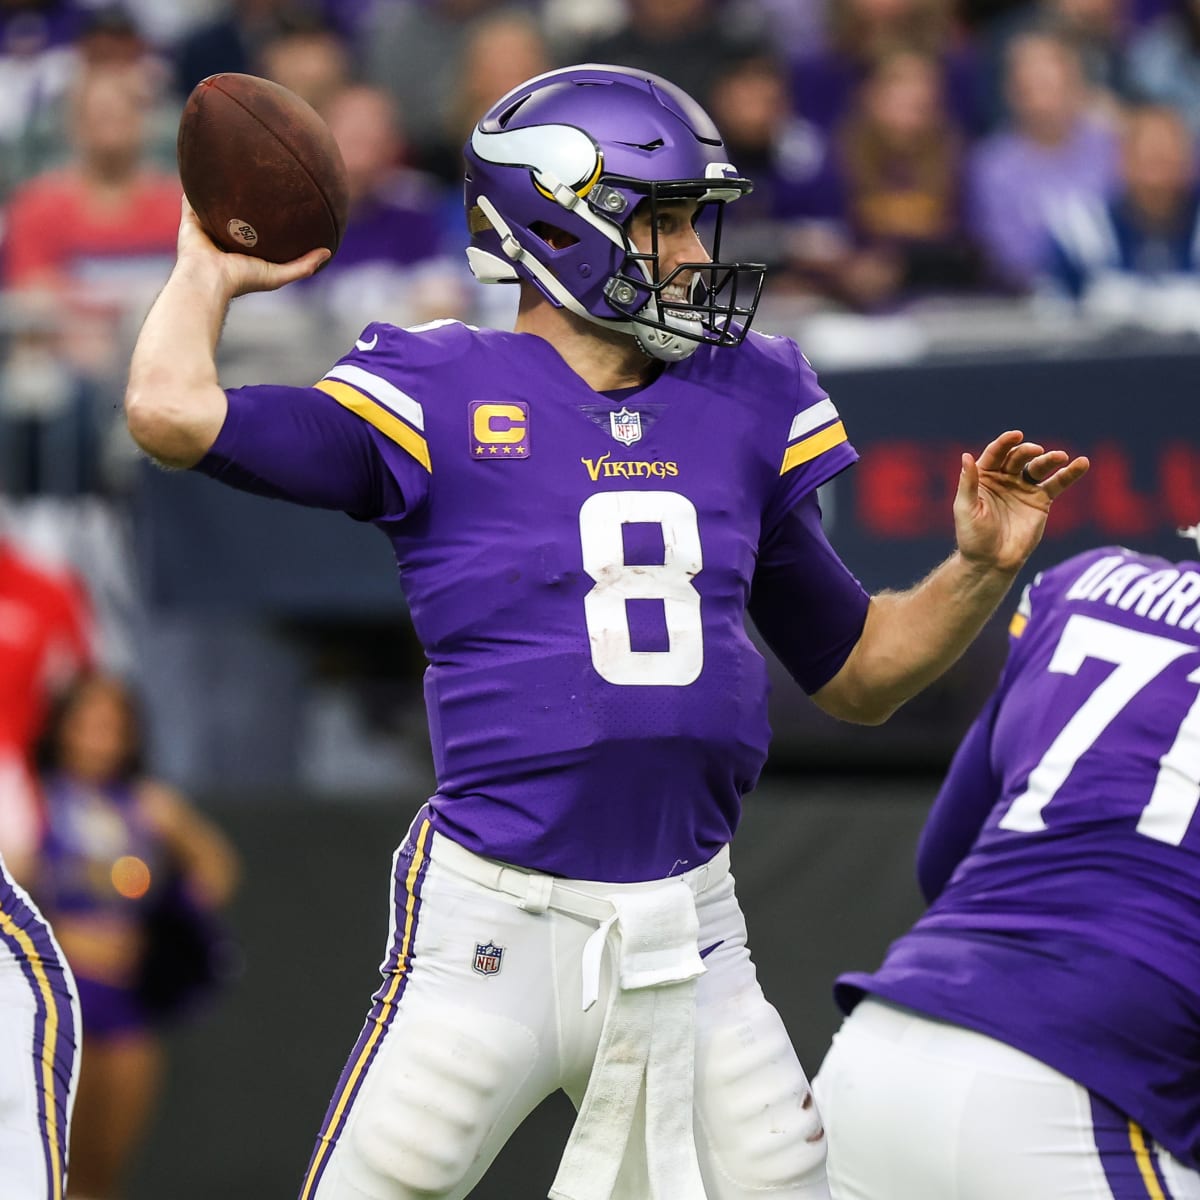 Vikings complete greatest comeback in NFL history with 39-36